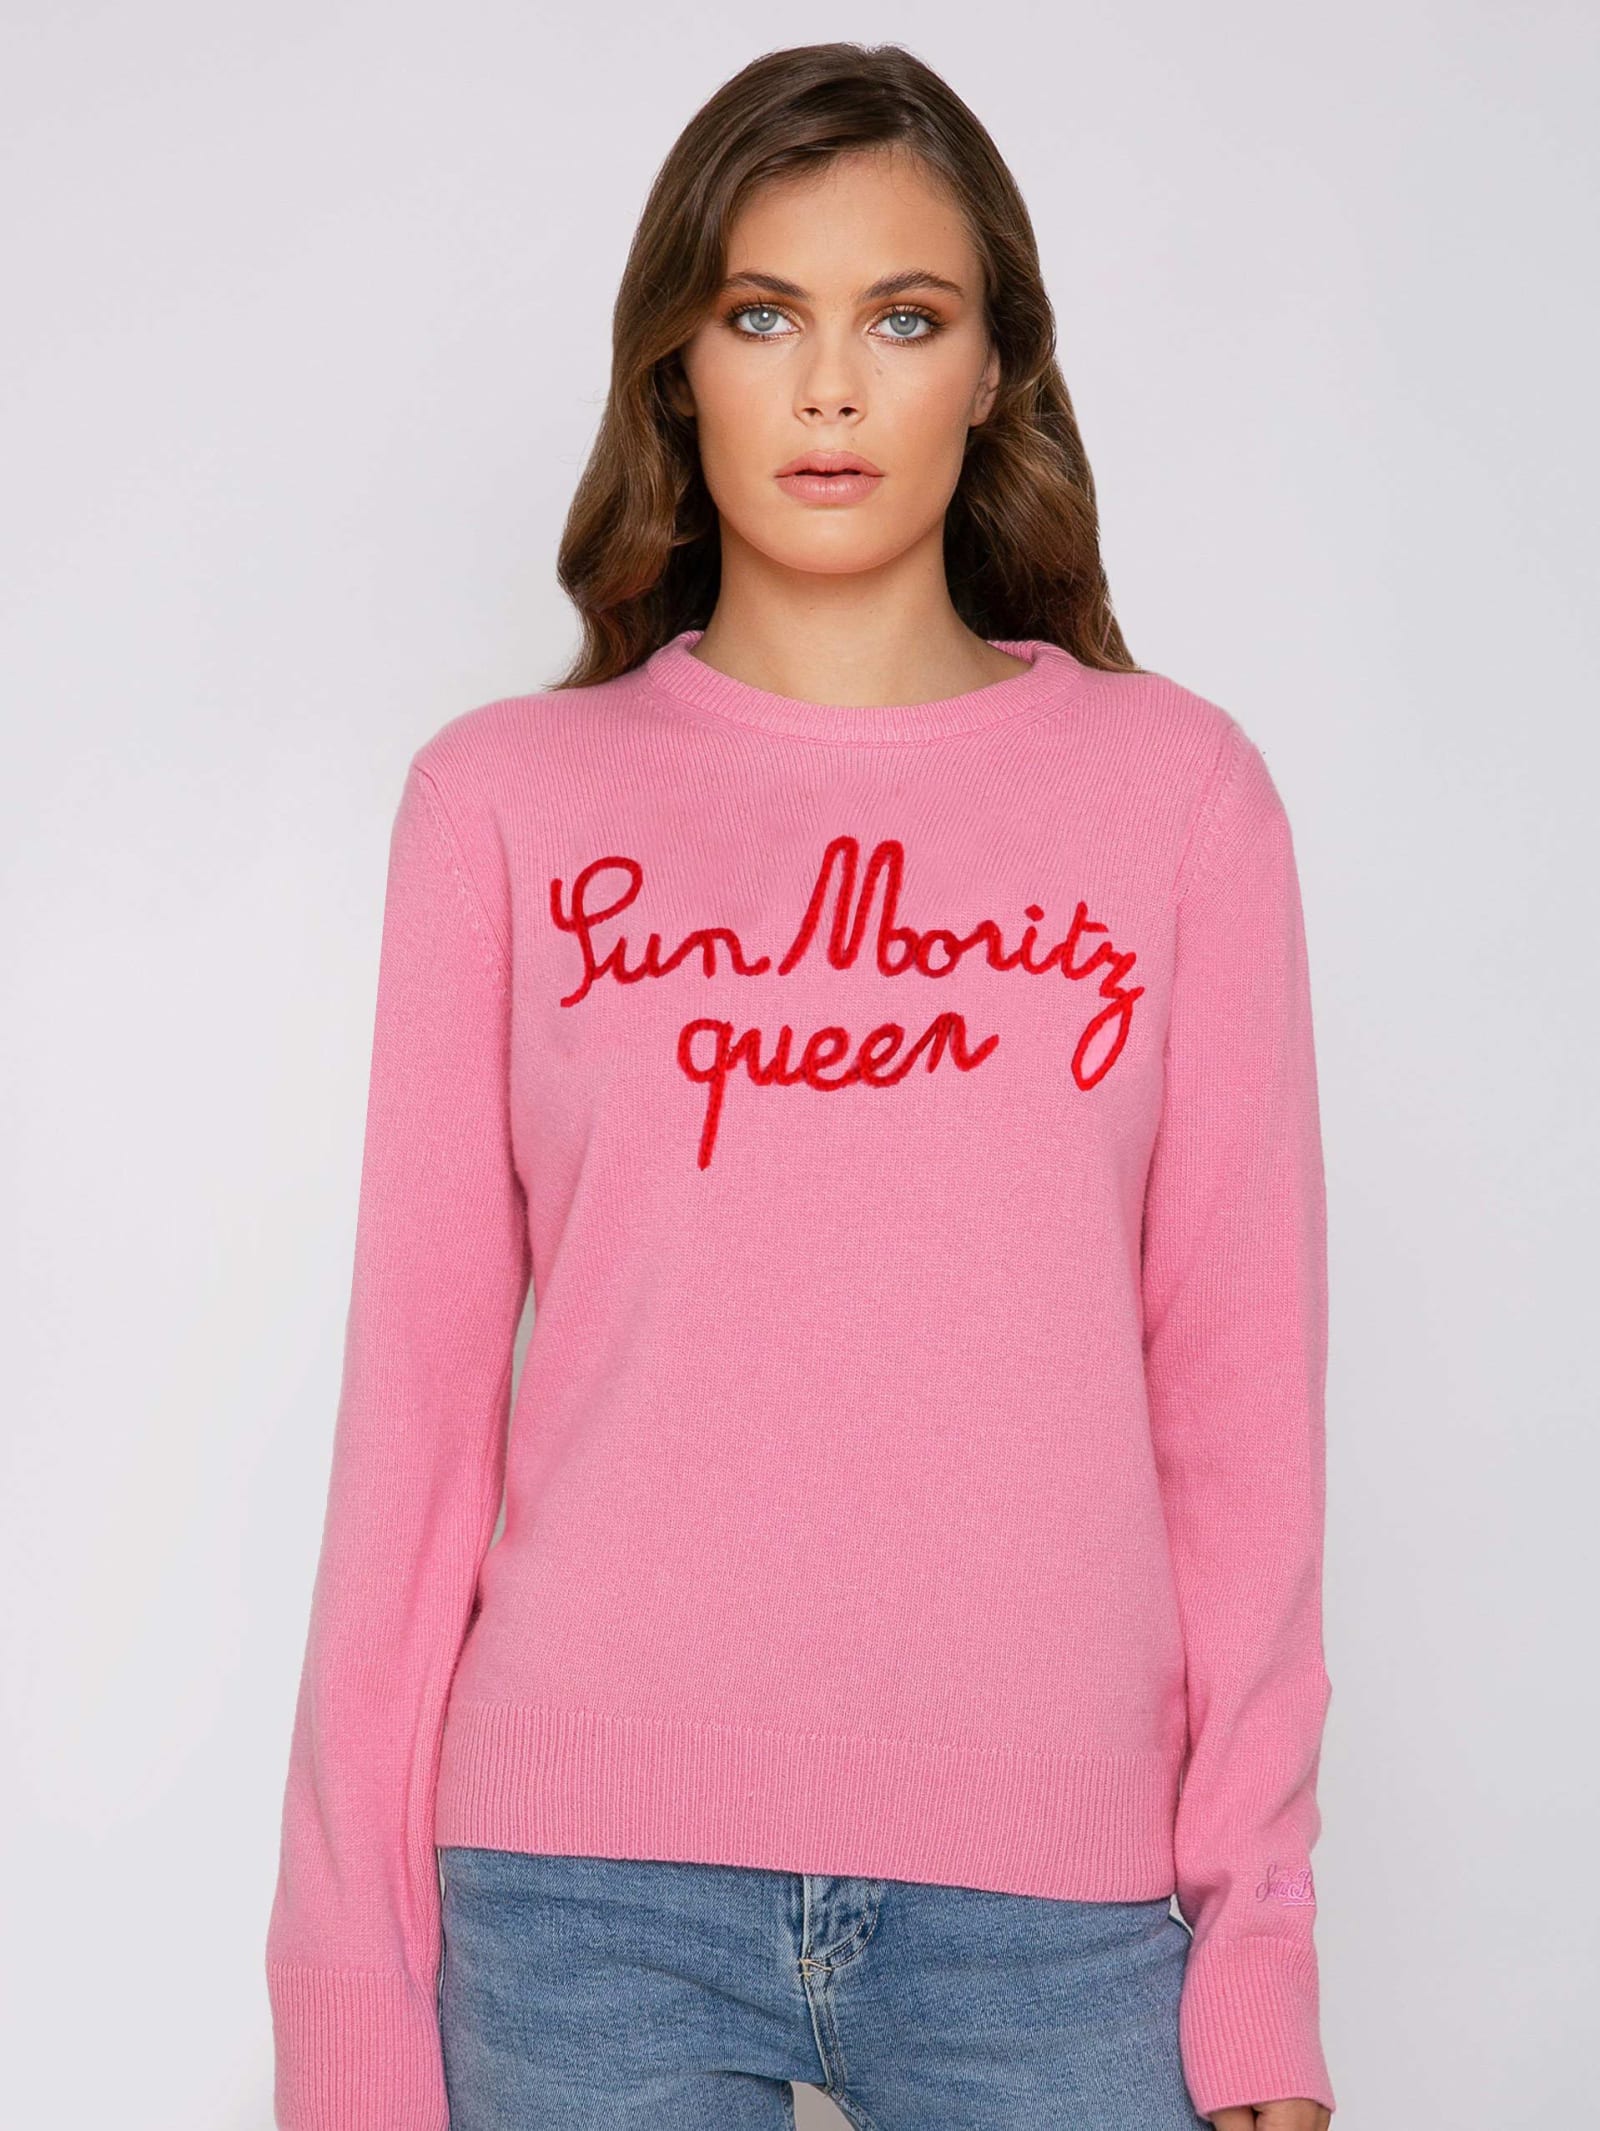 MC2 Saint Barth Woman Sweater With St. Moritz Queen Embroidery